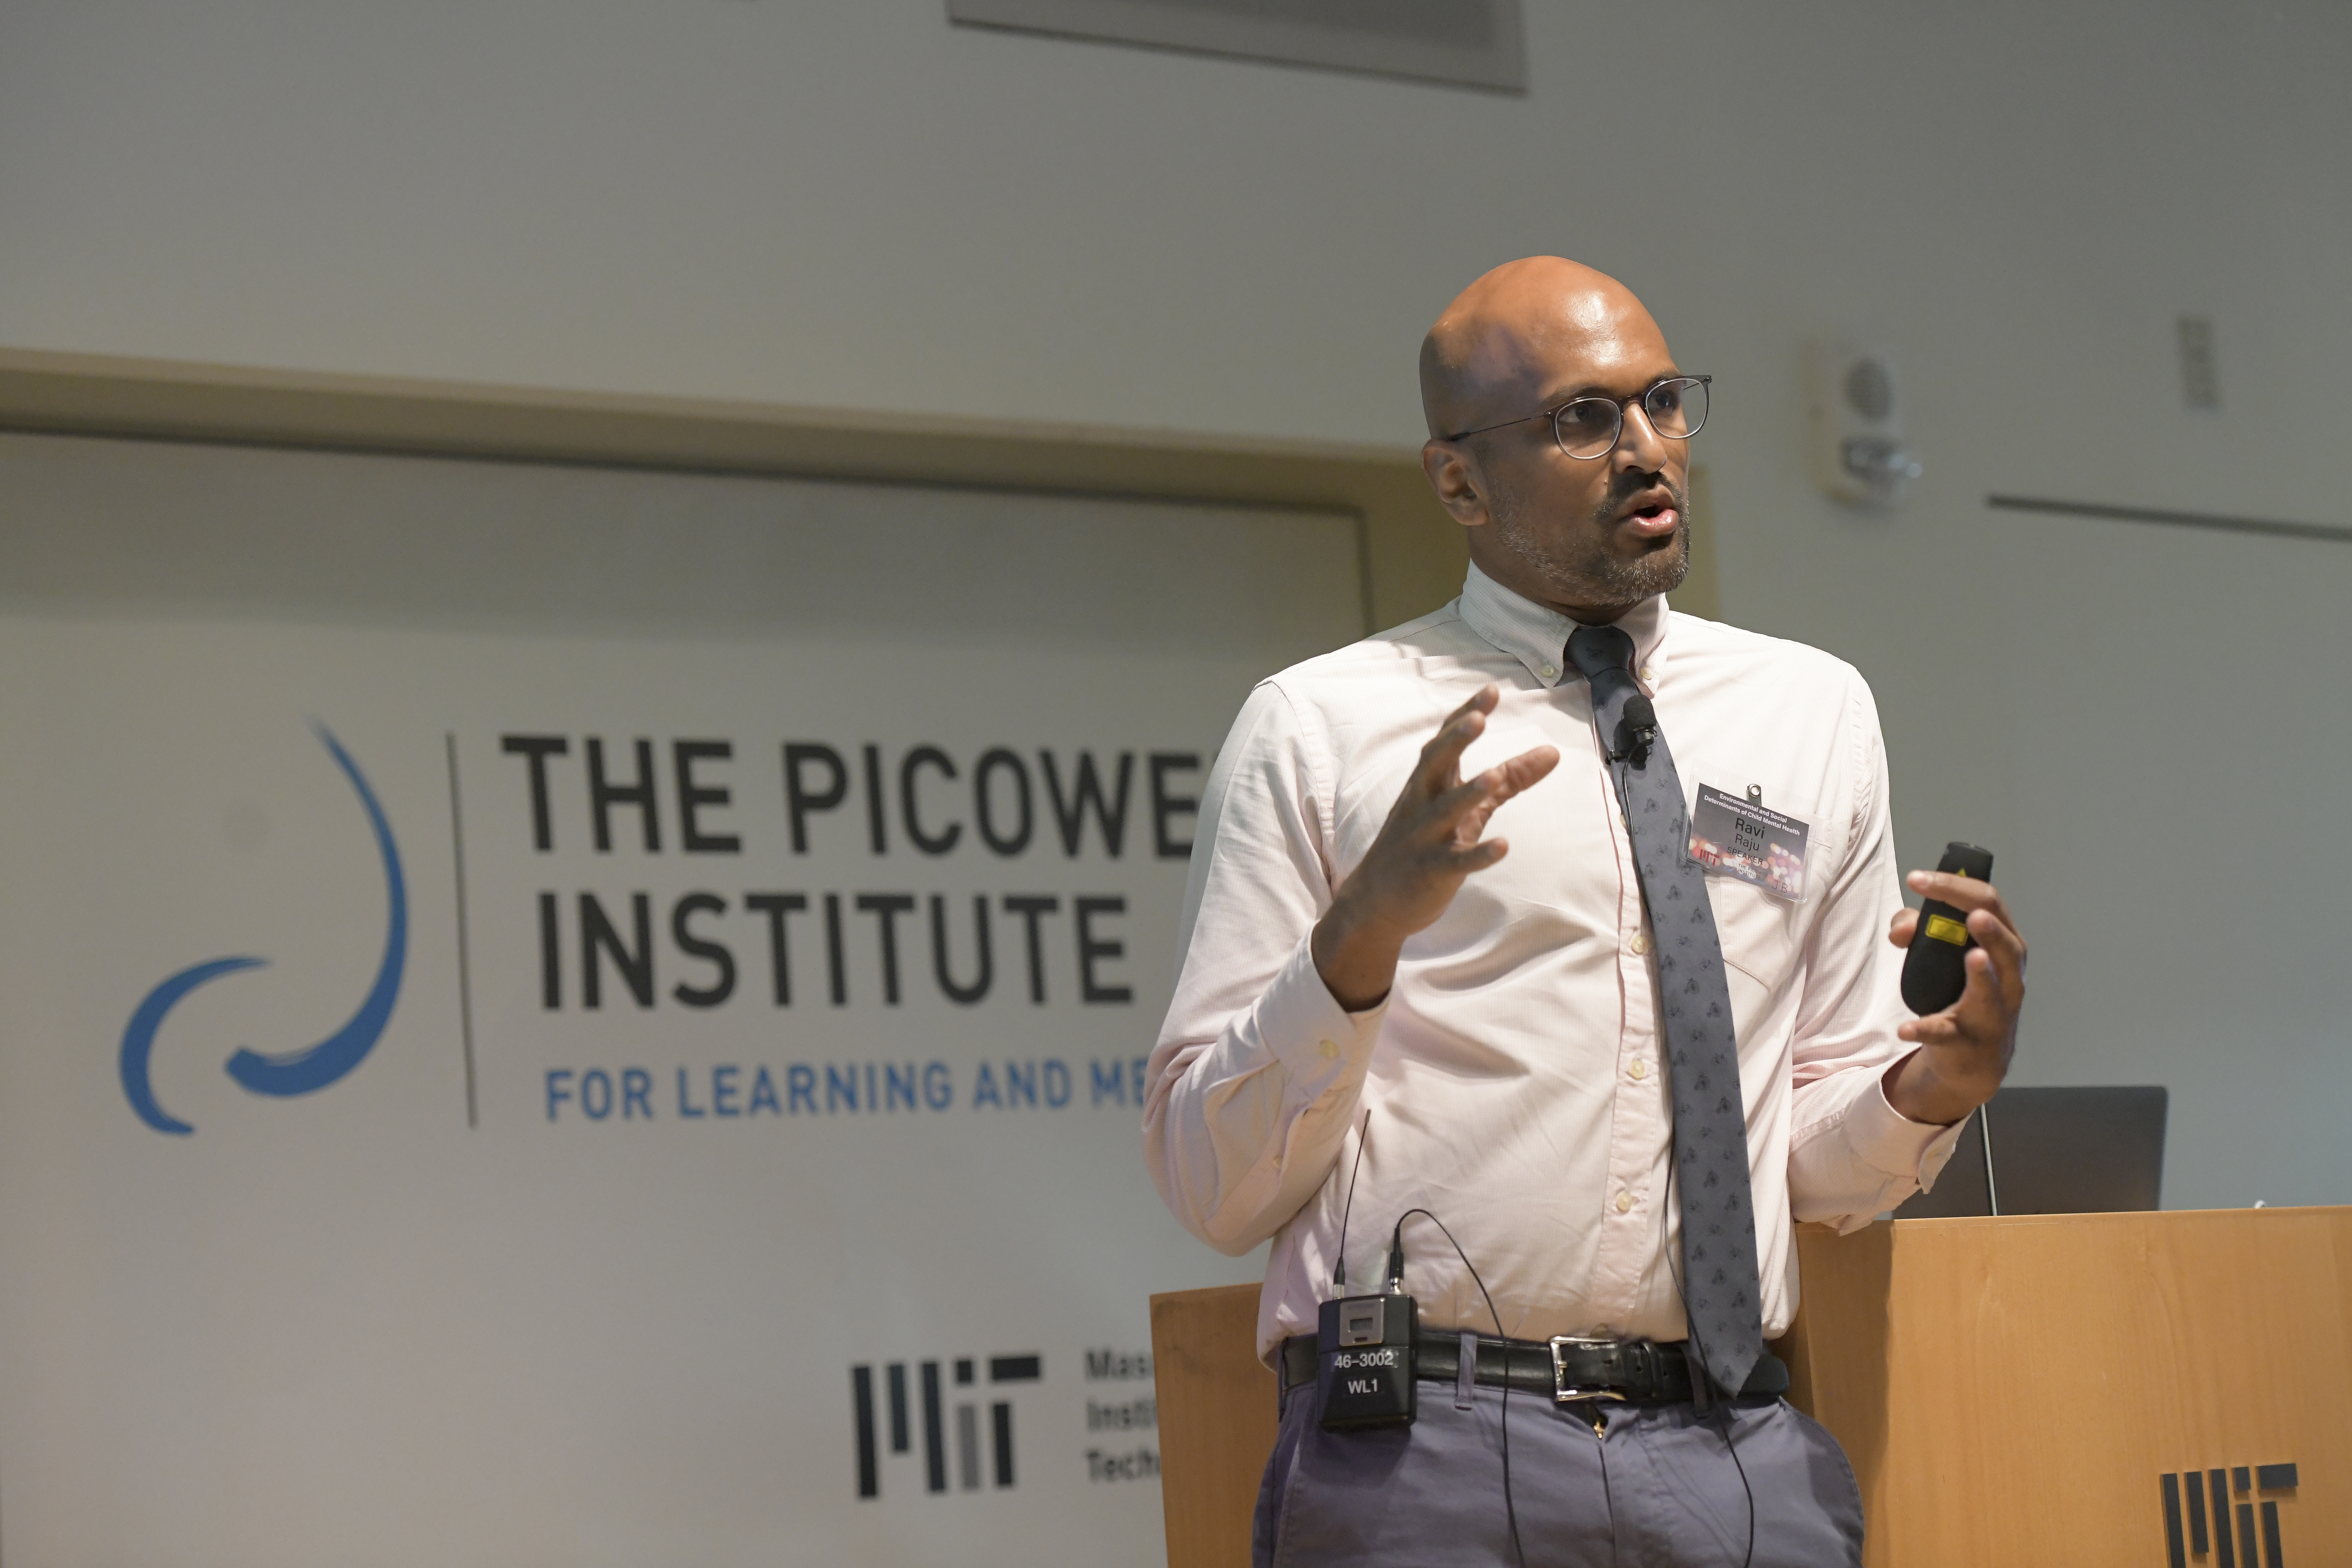 Ravi Raju, in a white shirt, tie and blue jeans speaks from a podium with the Picower Institute logo in the background